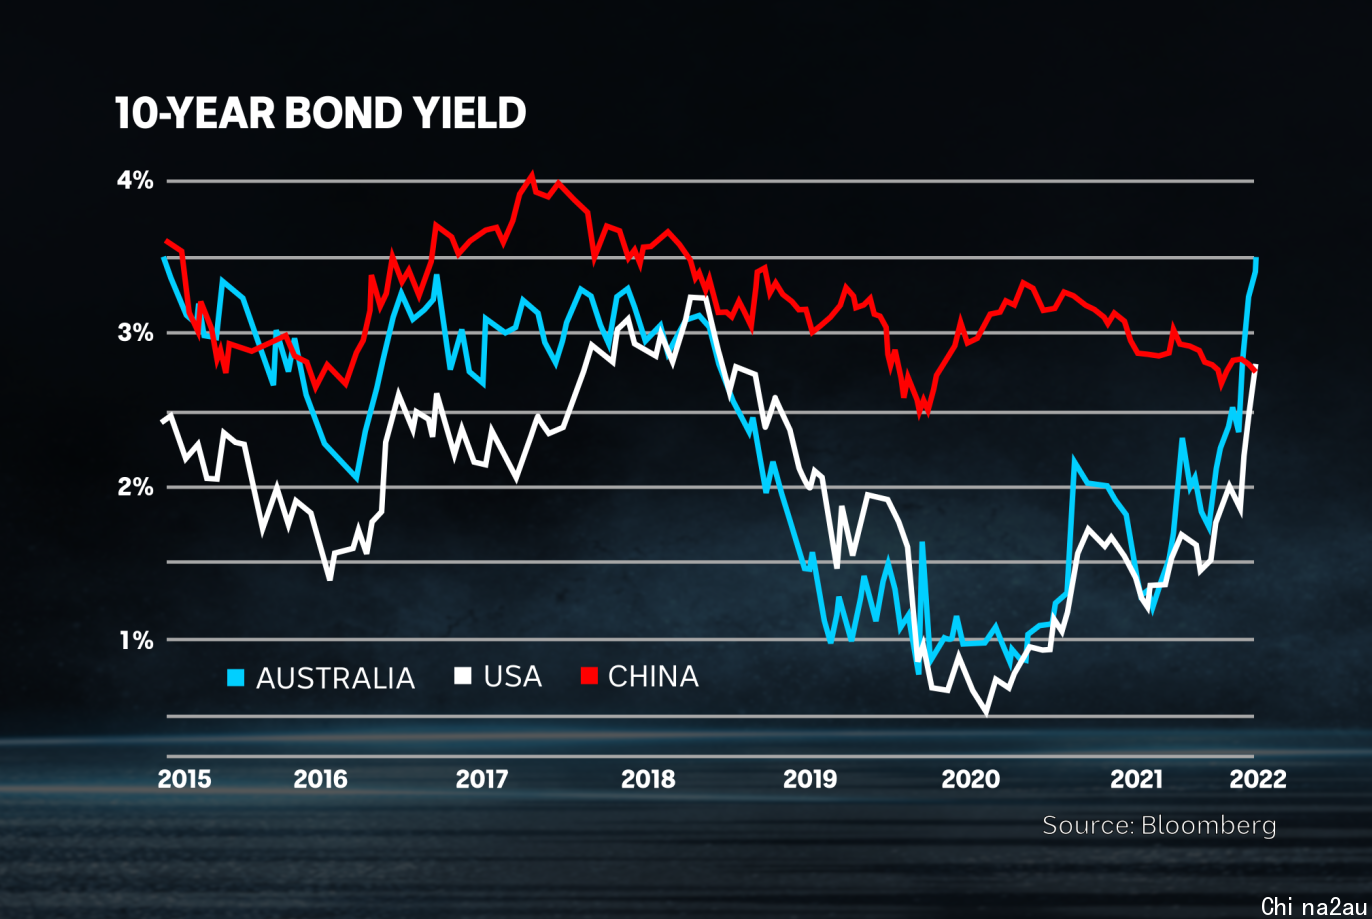 Ten-year government bond yields are at multi-year highs in Australia and the US, but falling in China.